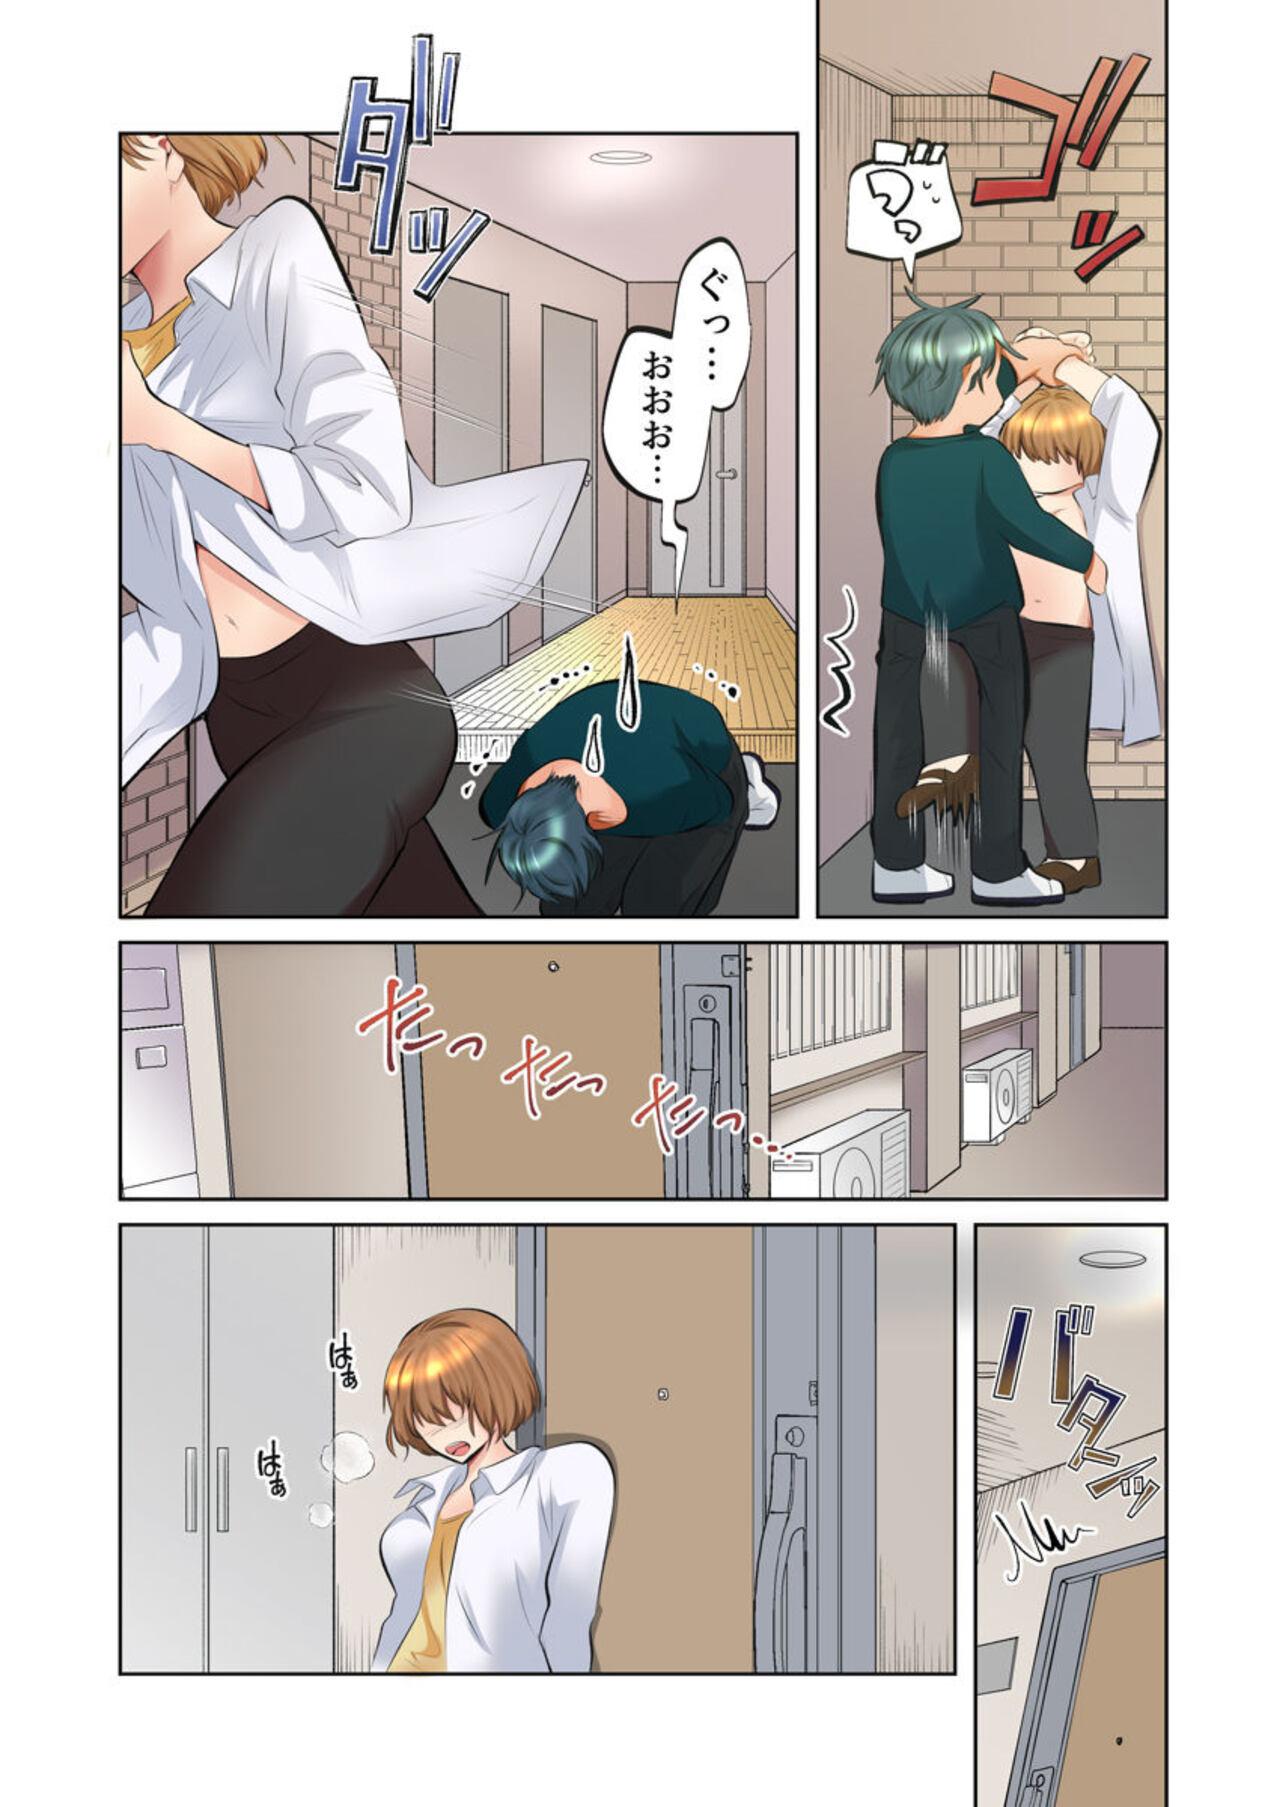 Sensual [Ika Hotaru] My Neighbor Is A Sadistic Ex-Boyfriend ~I Love My Husband, But My Aching Body Has Been Redeveloped~ (Full Color) 2 Face Fucking - Page 8